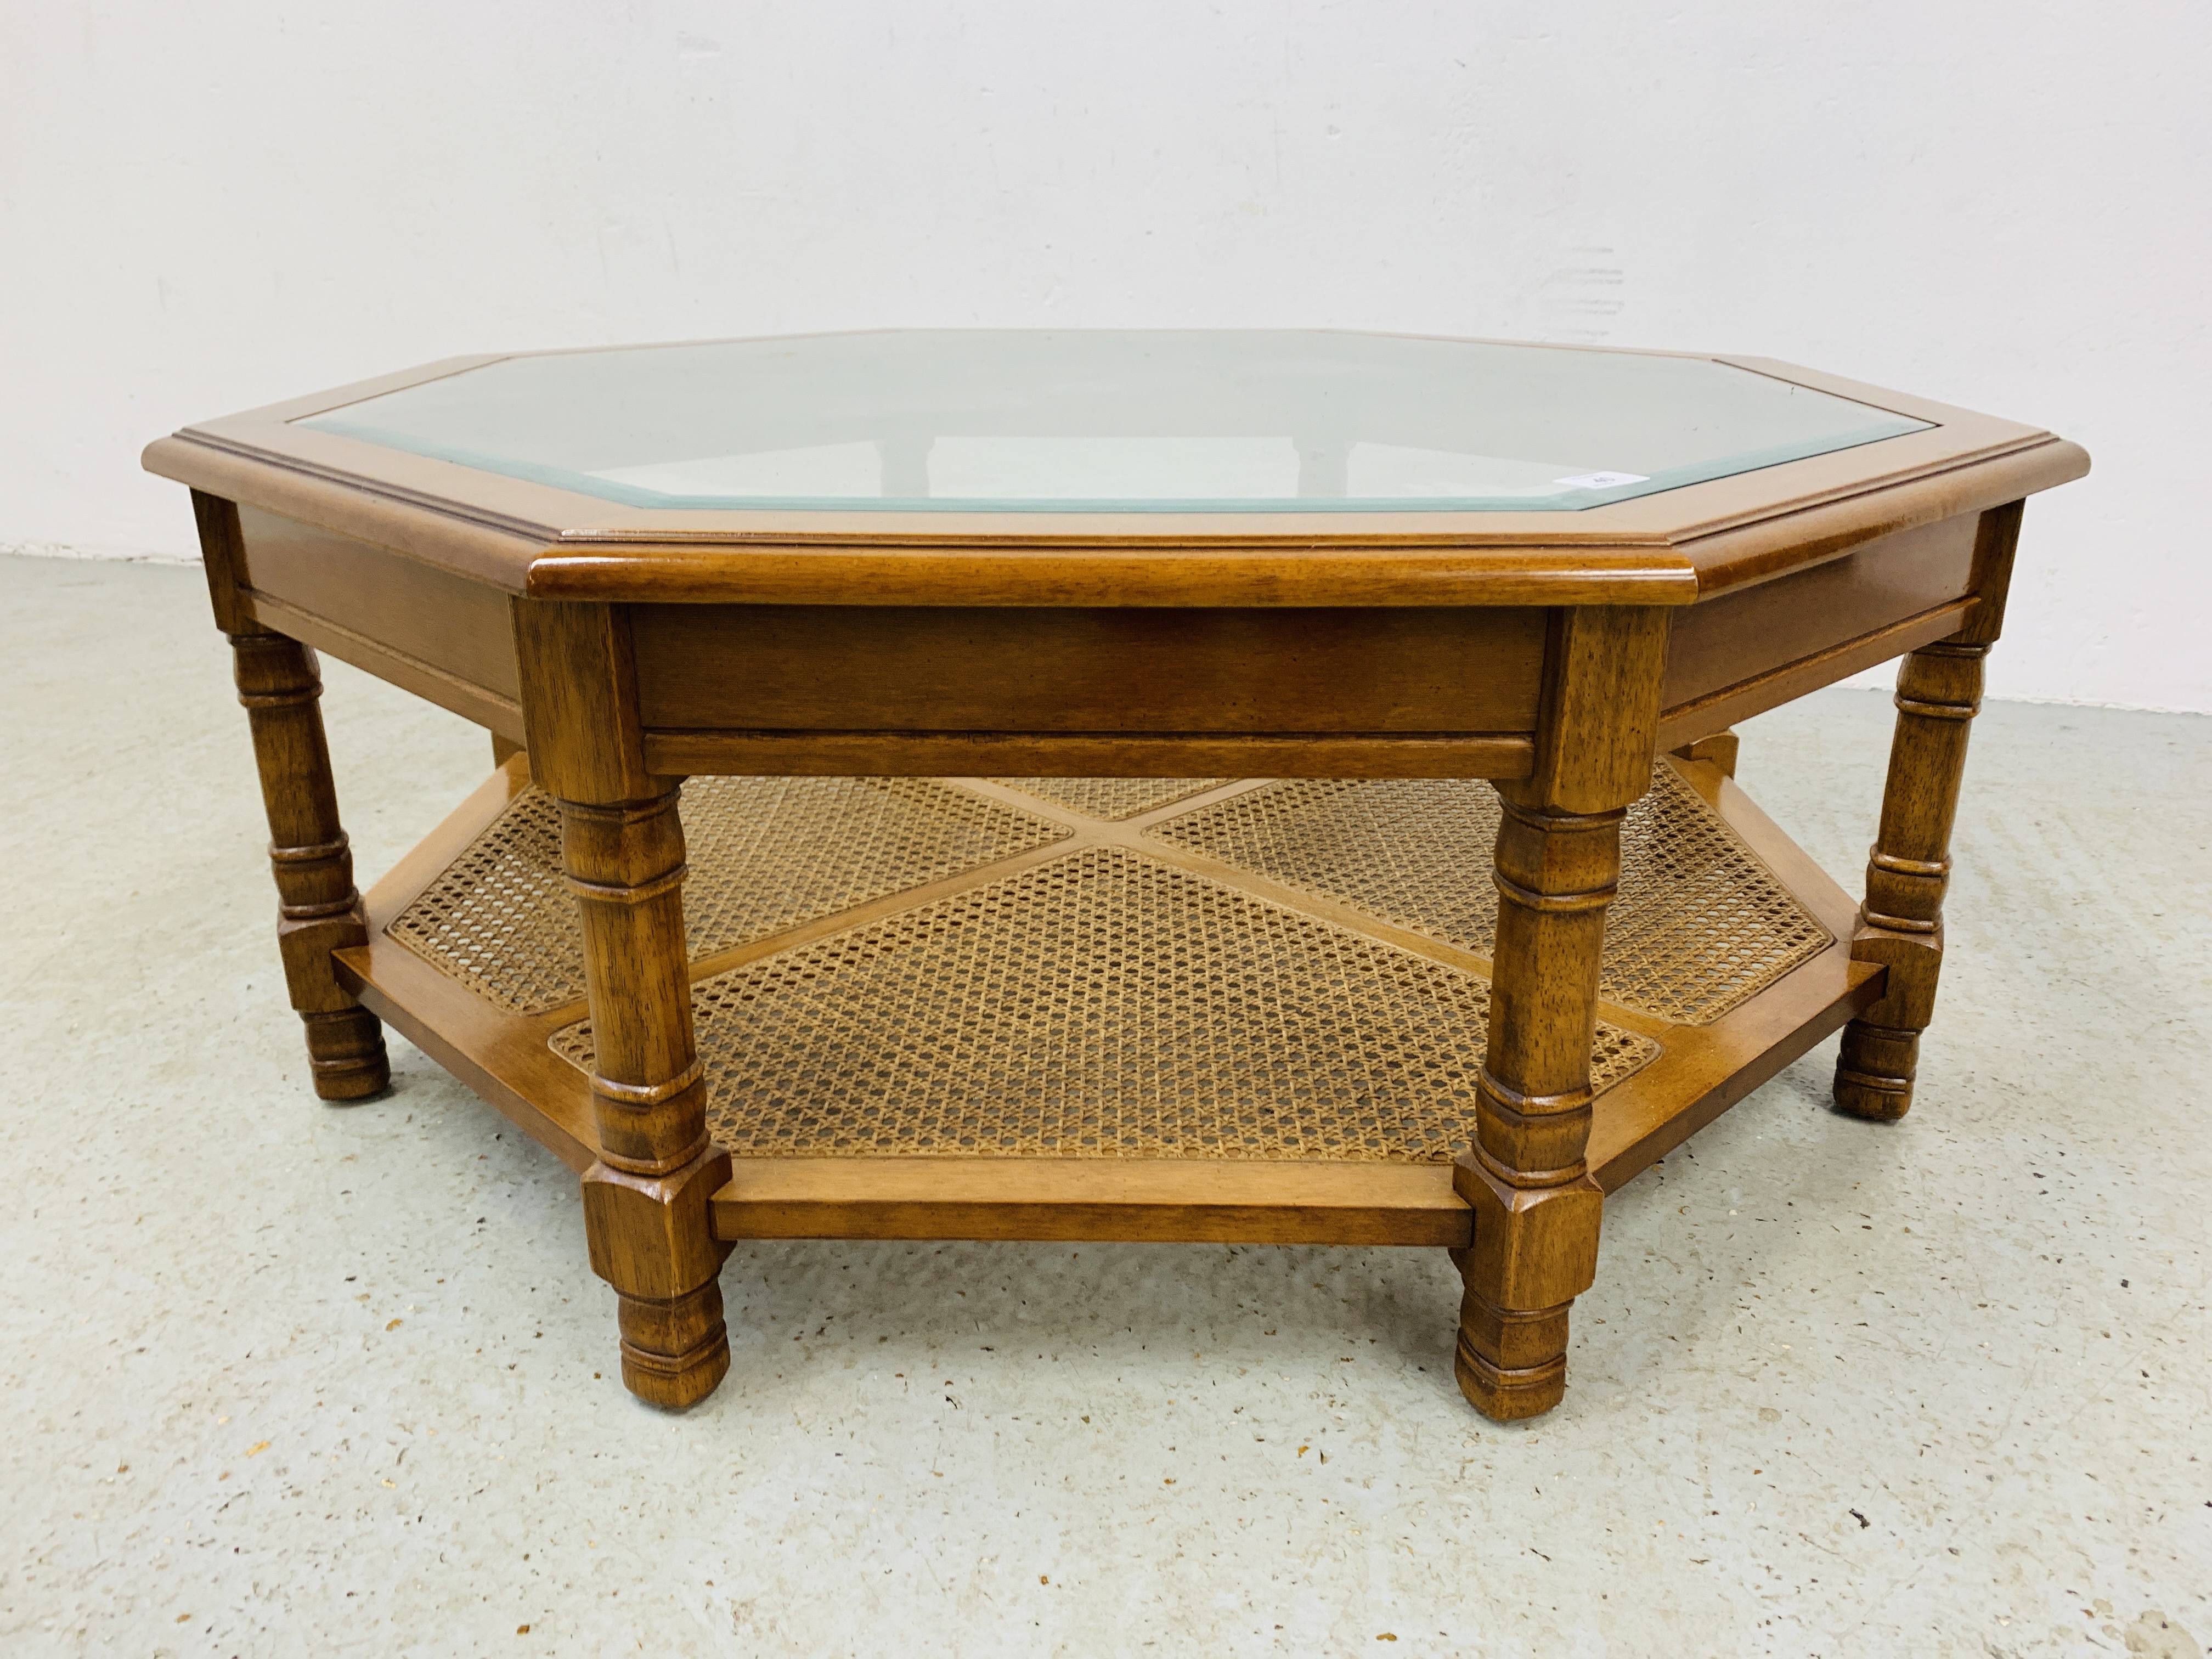 MODERN OCTAGON GLAZED COFFEE TABLE WITH RATTAN LOWER TIER - W 96CM. D 96CM. H 39CM. - Image 3 of 6